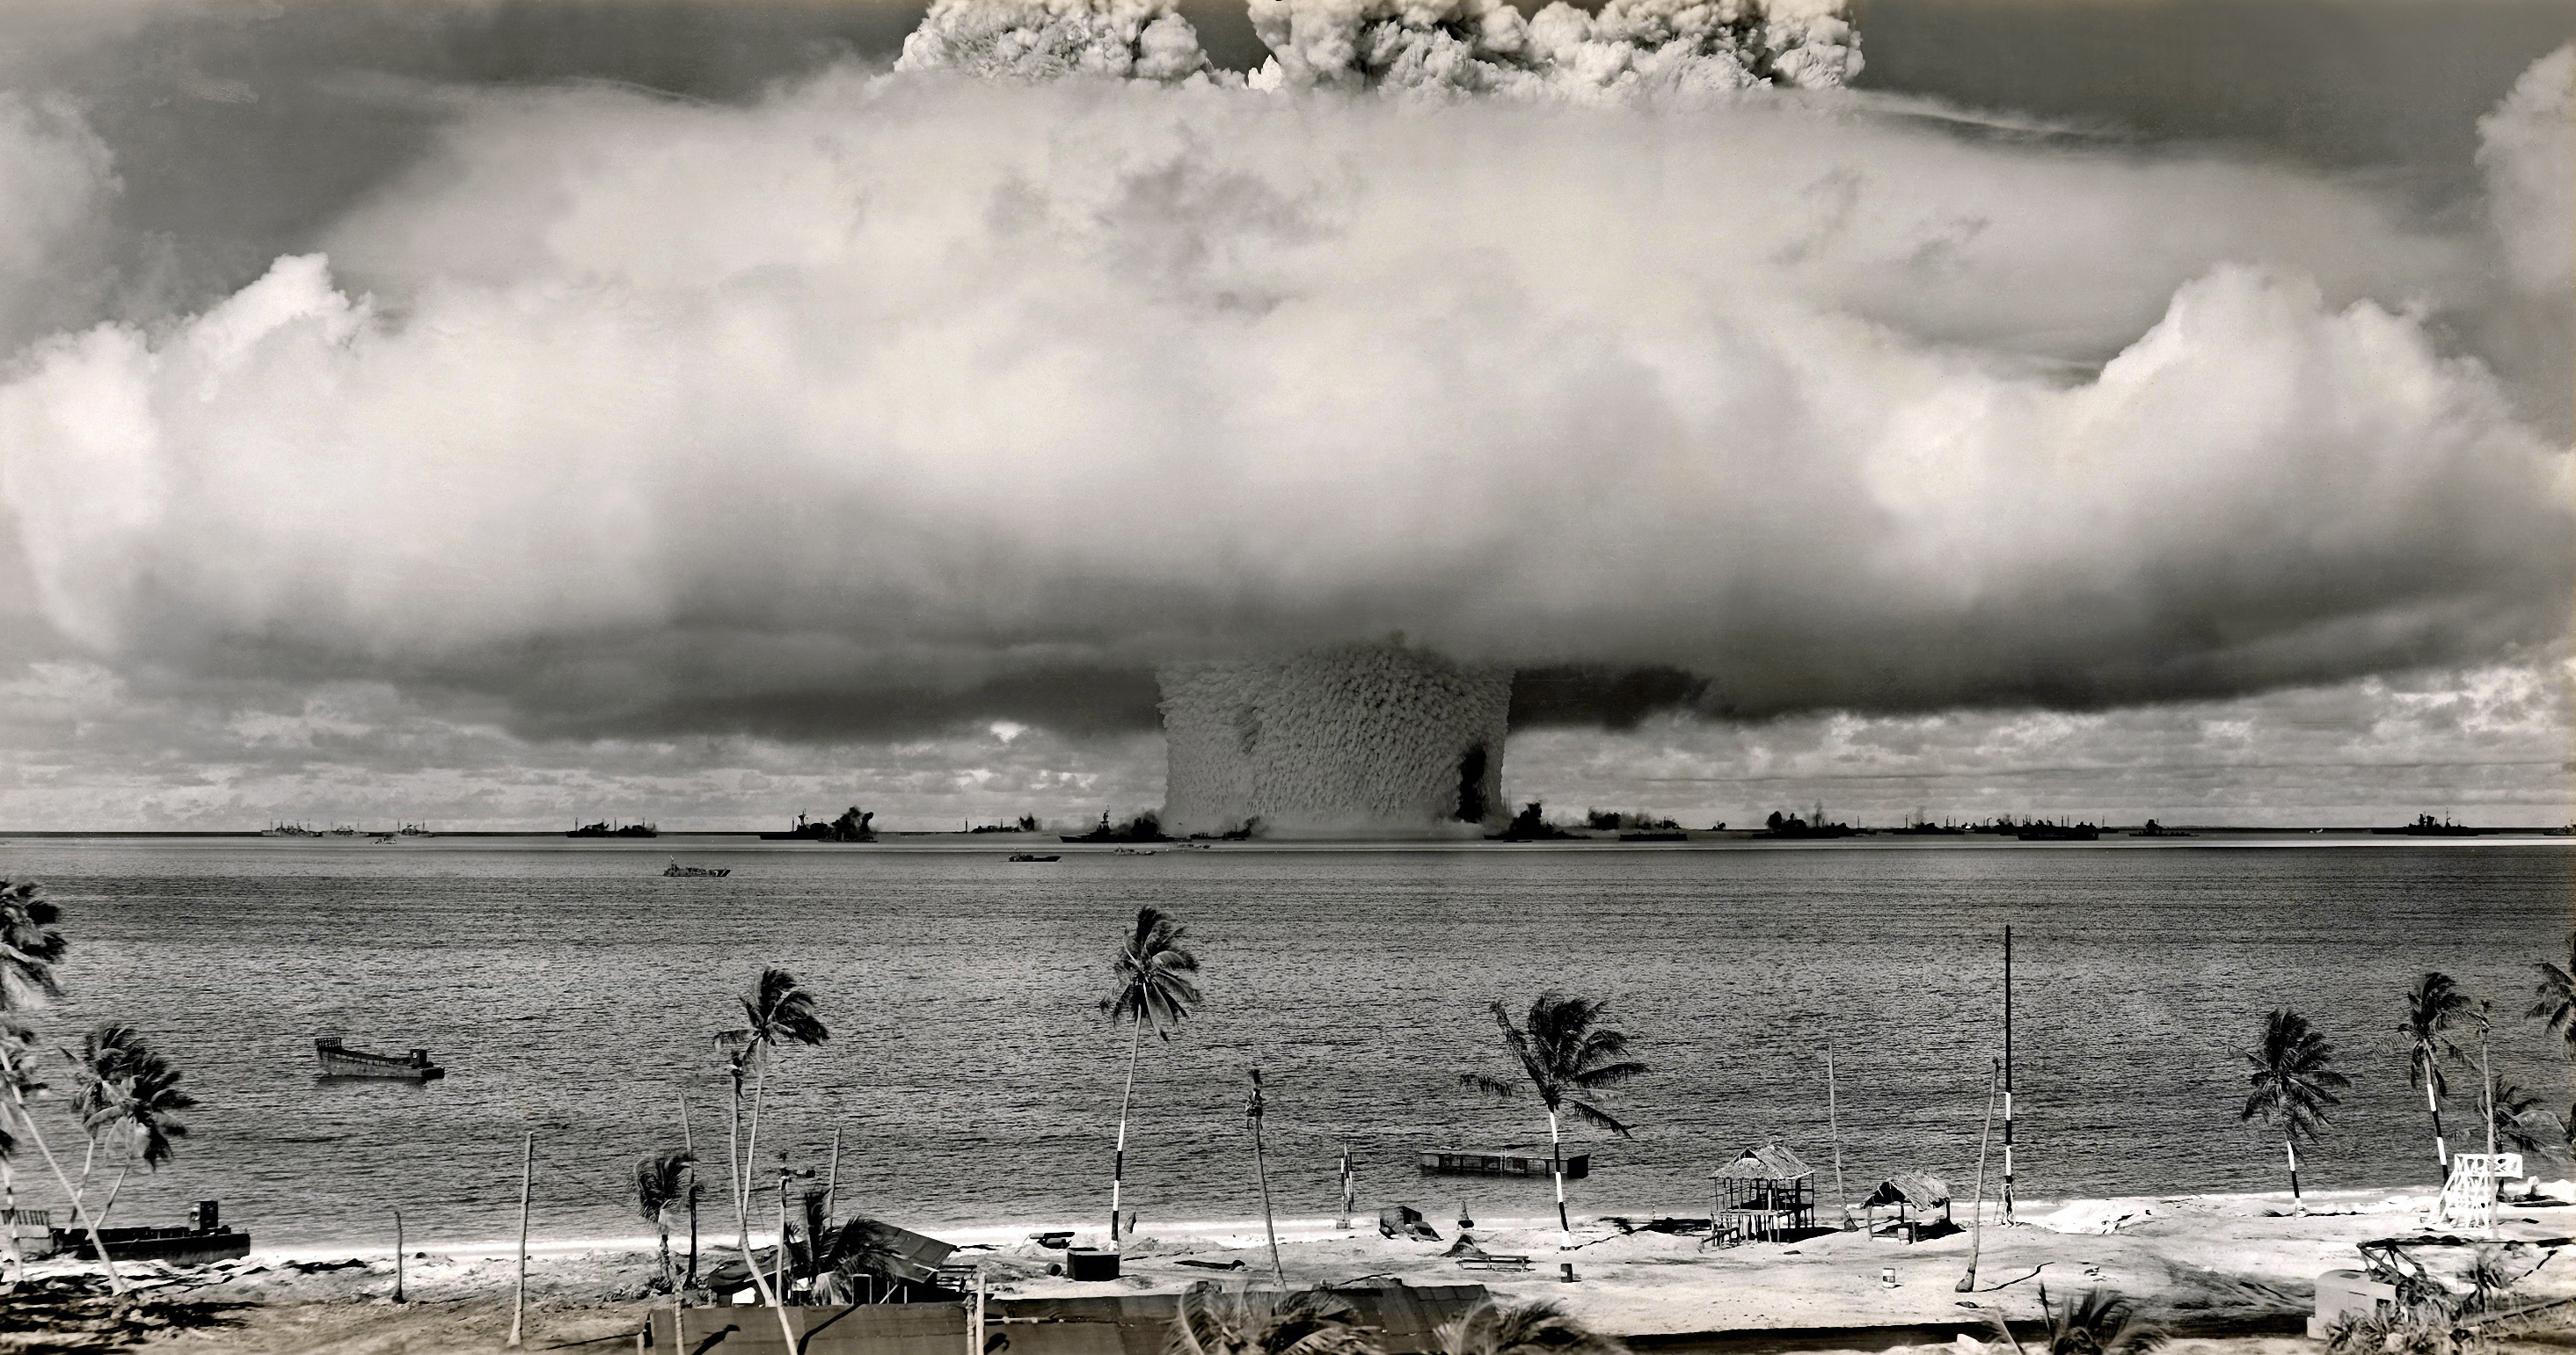 The BAKER explosion during Operation Crossroads, a series of two tests conducted by the U.S. to investigate the effect of nuclear weapons on naval warships, at Bikini Atoll, July 25, 1946. (Galerie Bilderwelt/Getty Images)